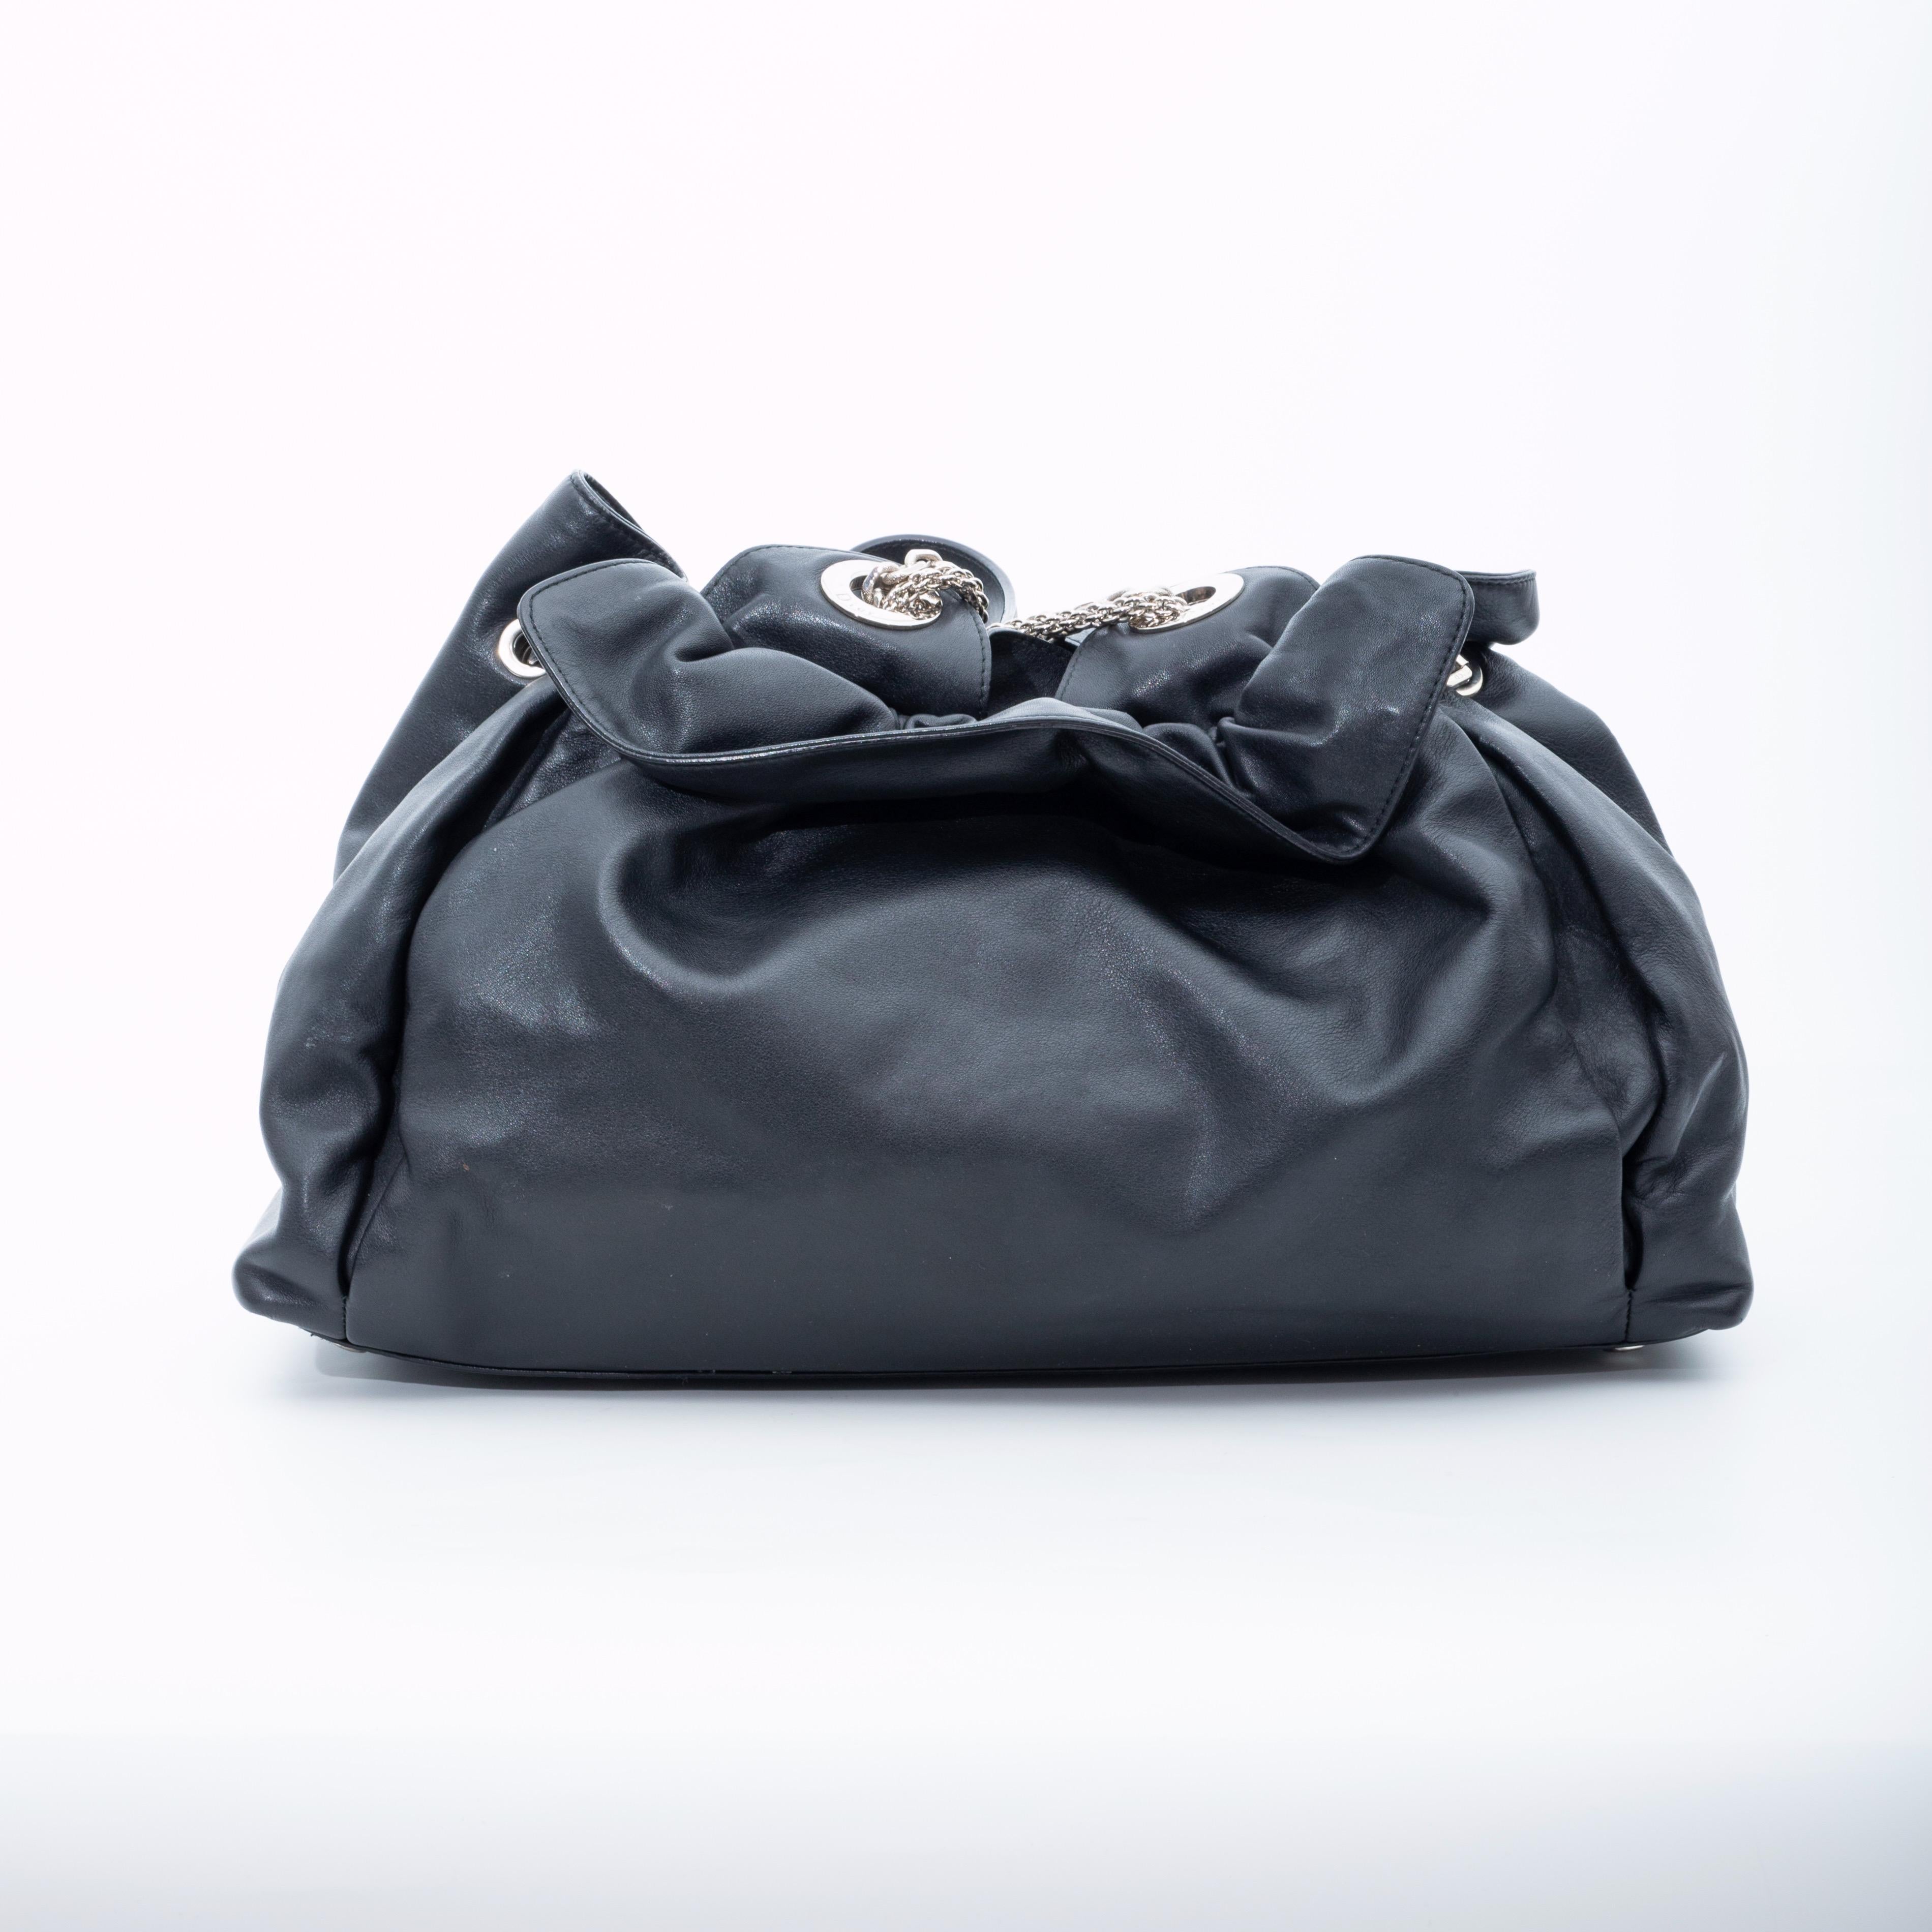 The Le Trente features a leather body, curb chain straps, a top magnetic snap closure and an interior zip pocket.

COLOR: Black
MATERIAL: Leather
ITEM CODE:17-B0-0029
MEASURES: H 9” x L 16” x D 6”
DROP: 10”
COMES WITH: Dust bag
CONDITION: Good -